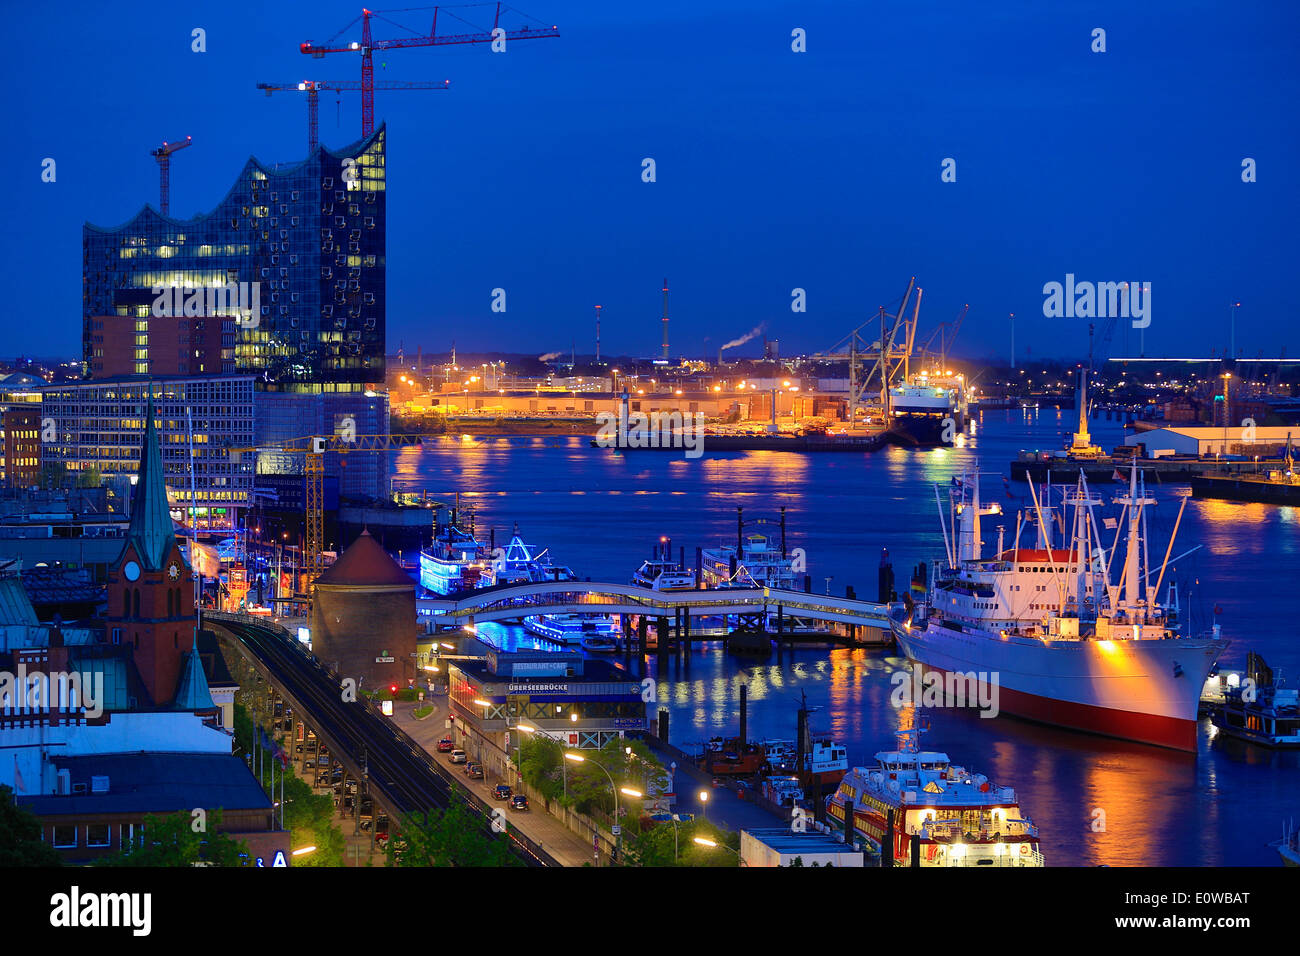 Elbe River with the museum ship Cap San Diego and Elbe Philharmonic Hall, at dusk, Hamburg, Germany Stock Photo